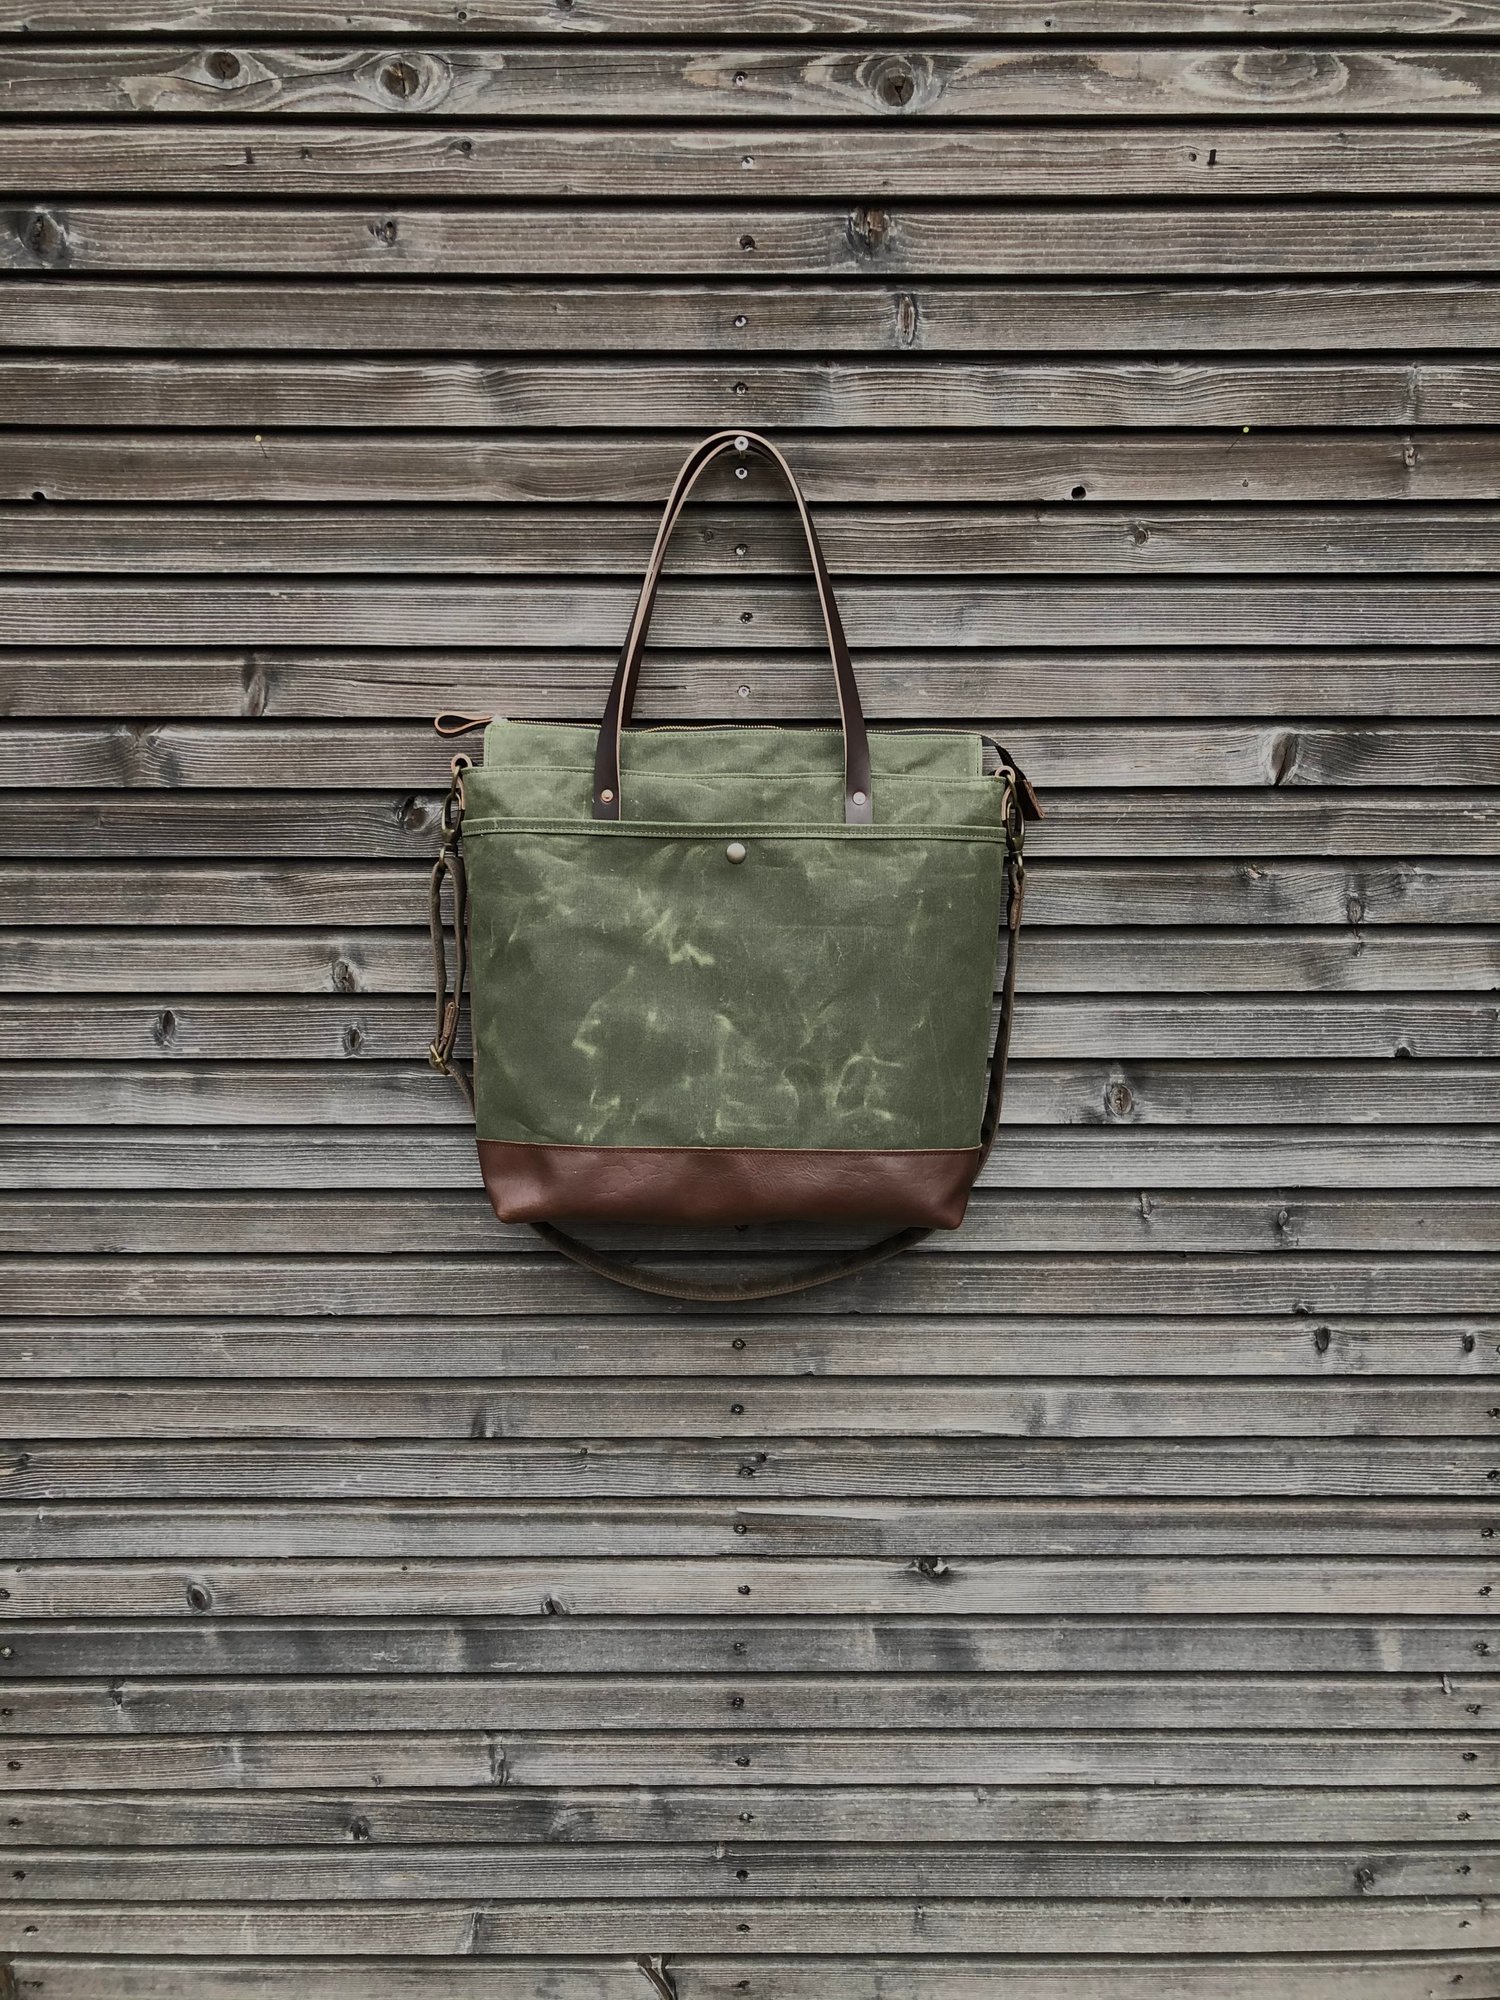 Image of Diaper bag / weekend bag in waxed canvas with leather handles and bottom COLLECTION UNISEX